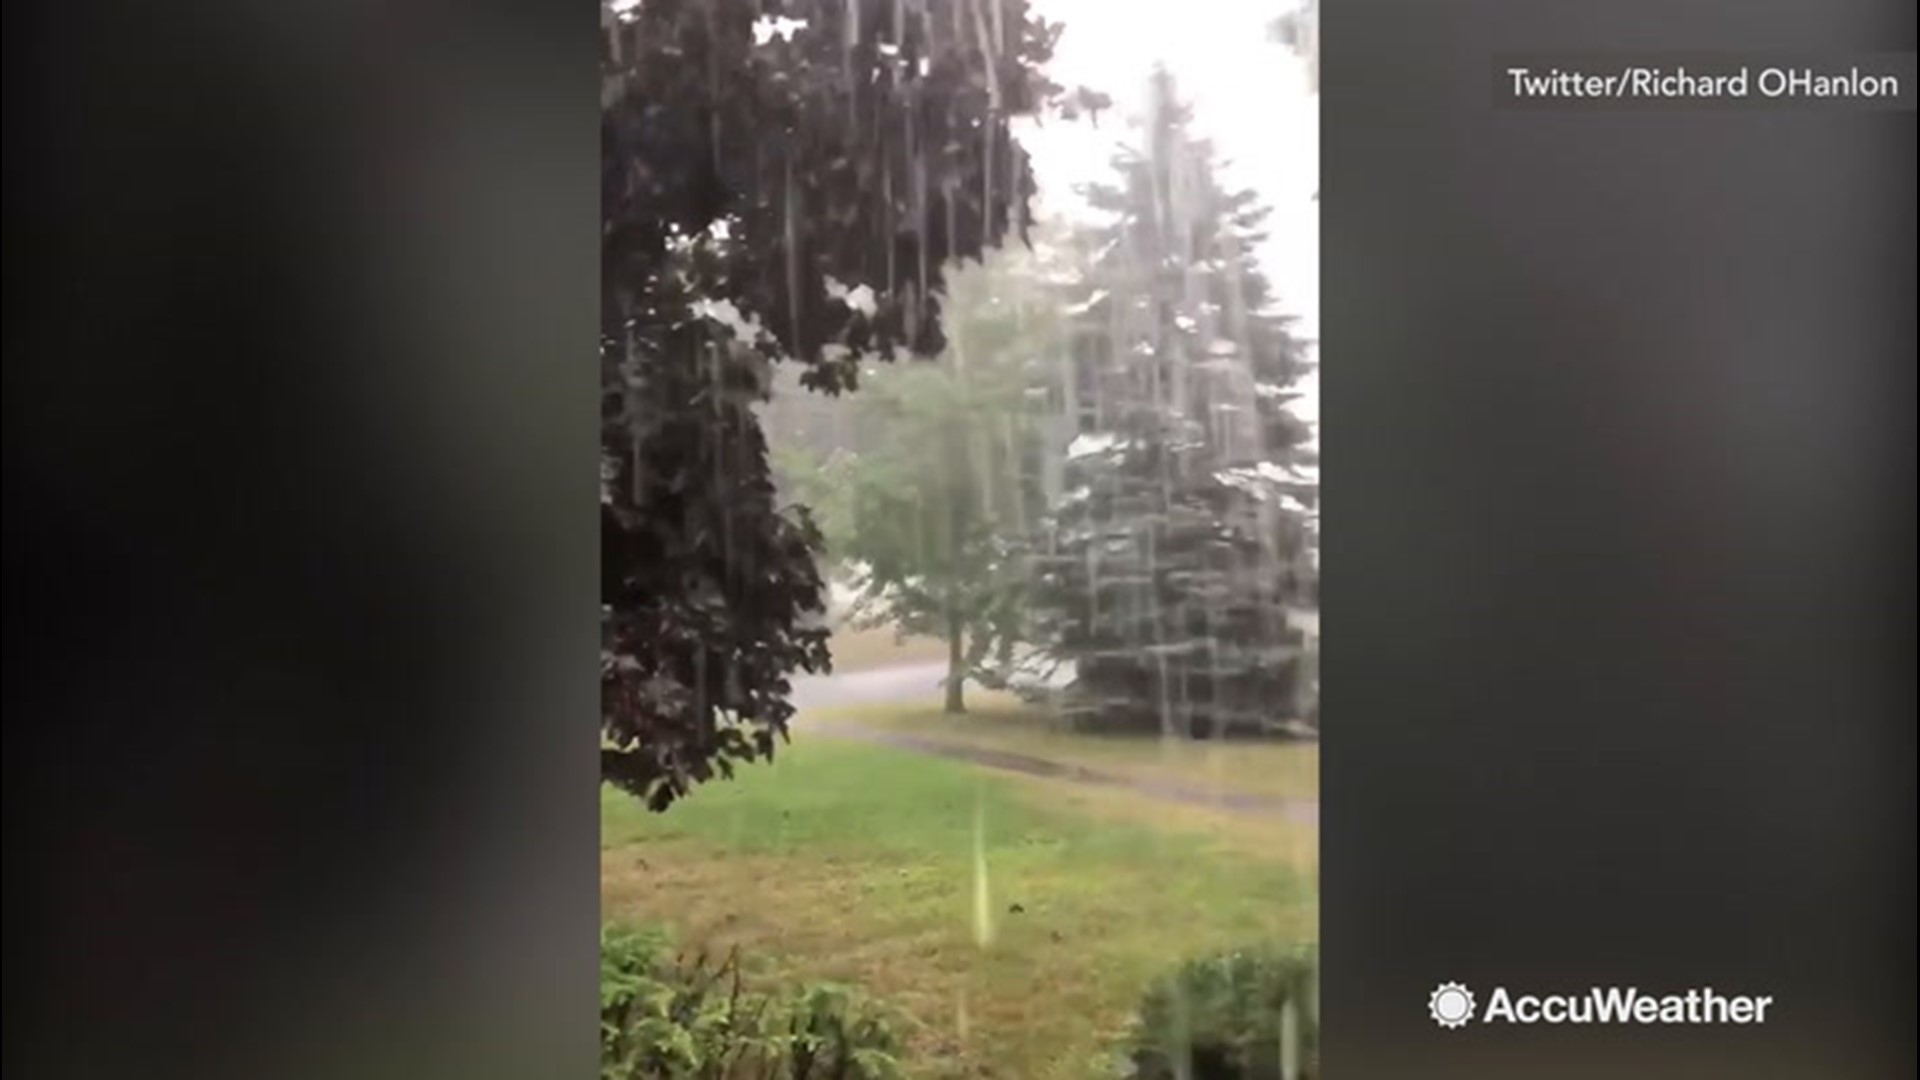 A thunderstorm rolled through Postdam, New York, on Aug. 21, with heavy rain and 'CONTINUOUS LIGHTNING/THUNDER,' according to Twitter user Richard OHanlon.